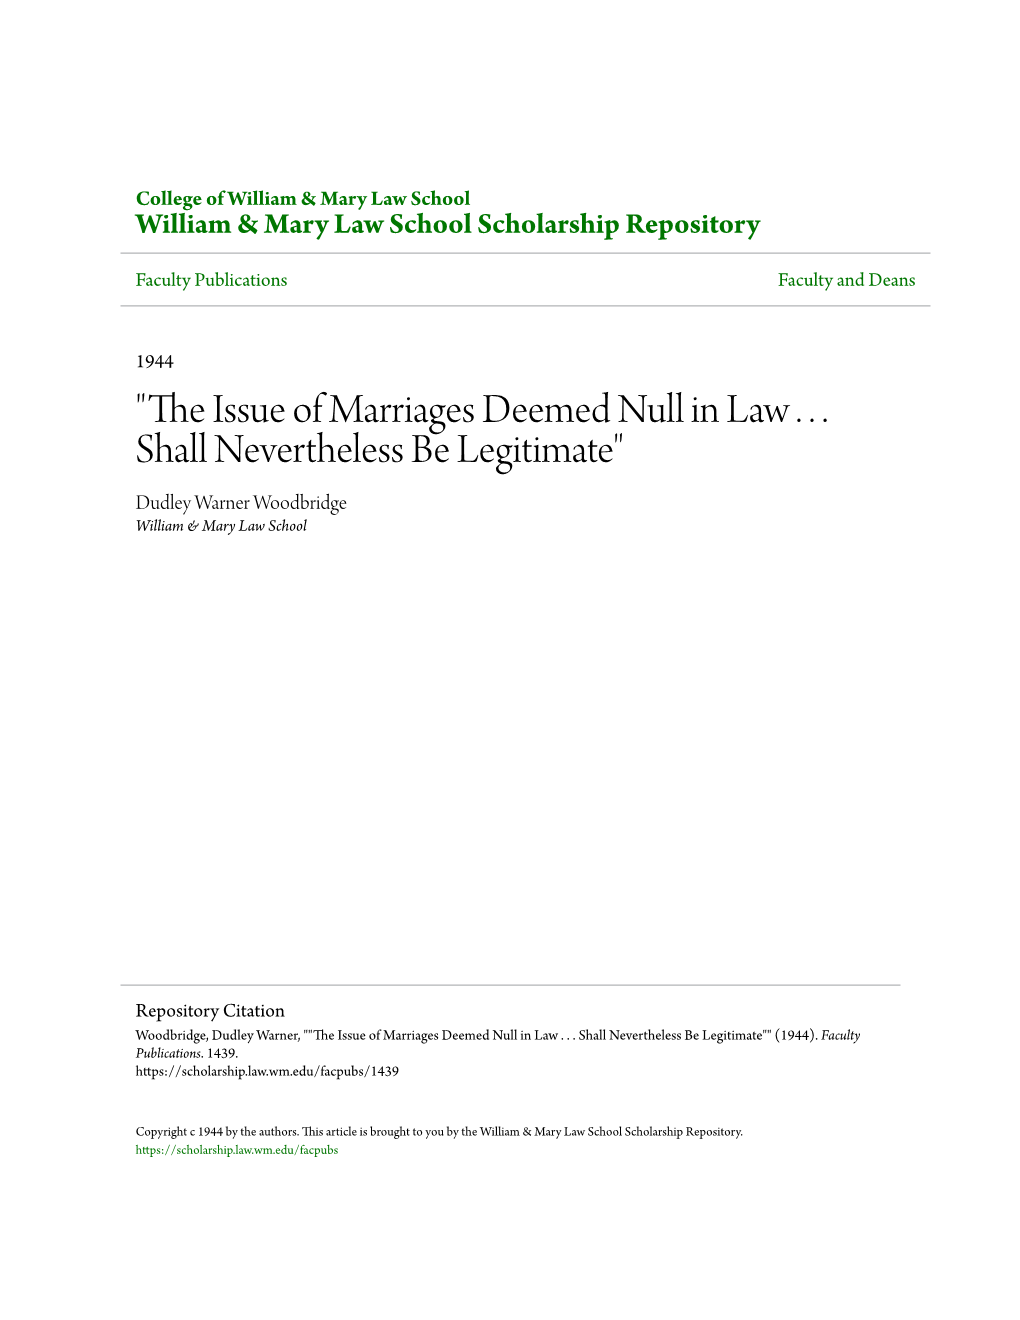 "The Issue of Marriages Deemed Null in Law . . . Shall Nevertheless Be